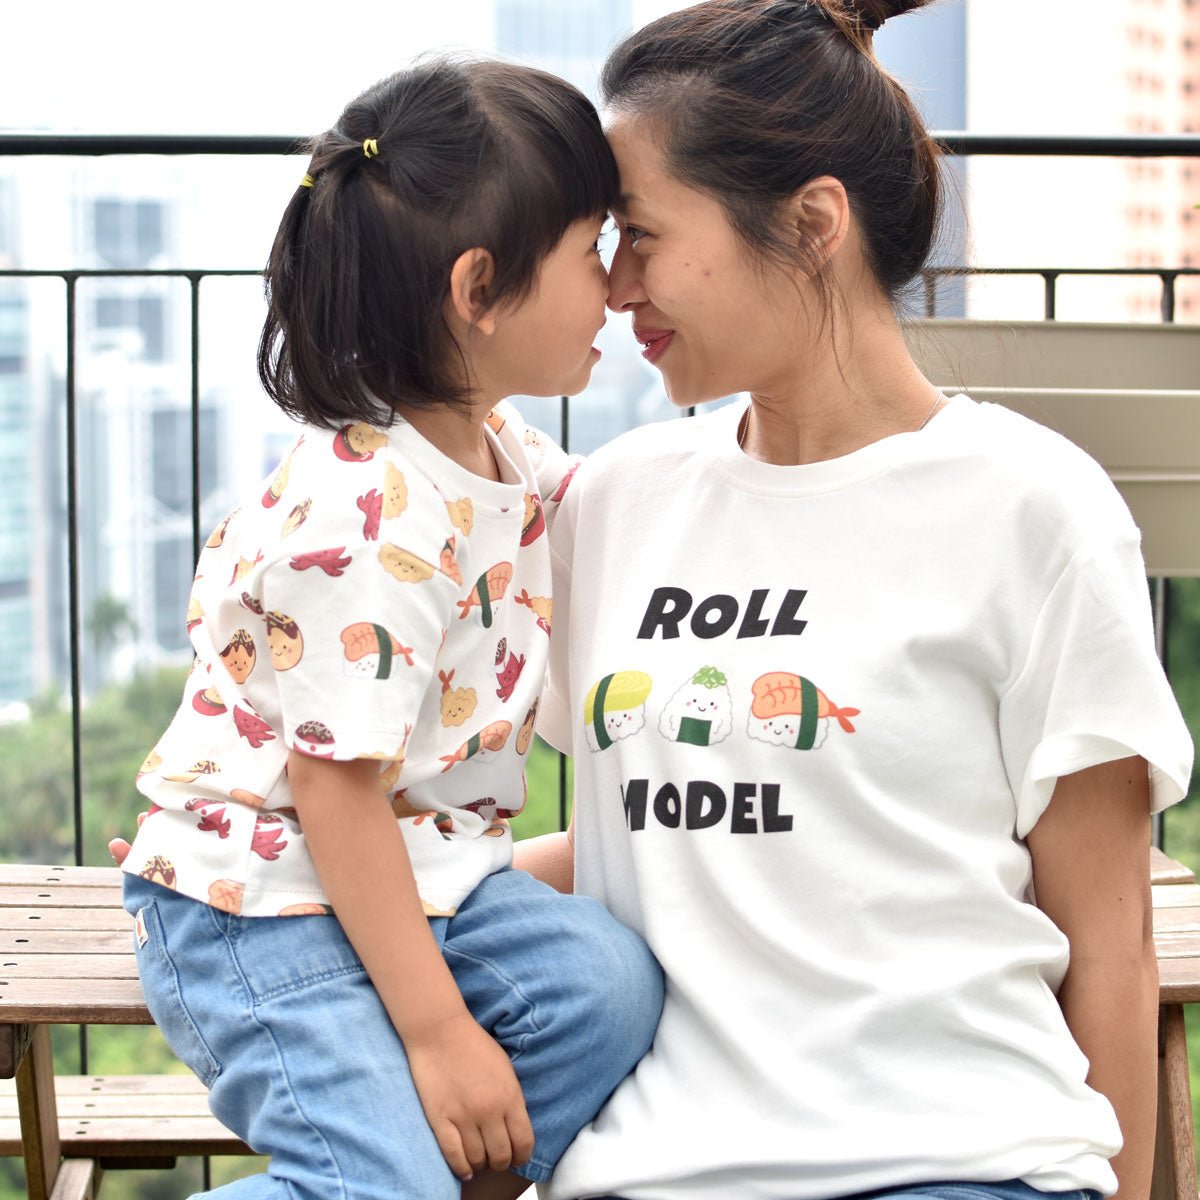 mommy and daughter child wearing the wee bean organic cotton super soft mommy and me twinning matching t-shirts adult women teen t-shirt in sushi roll model takoyaki